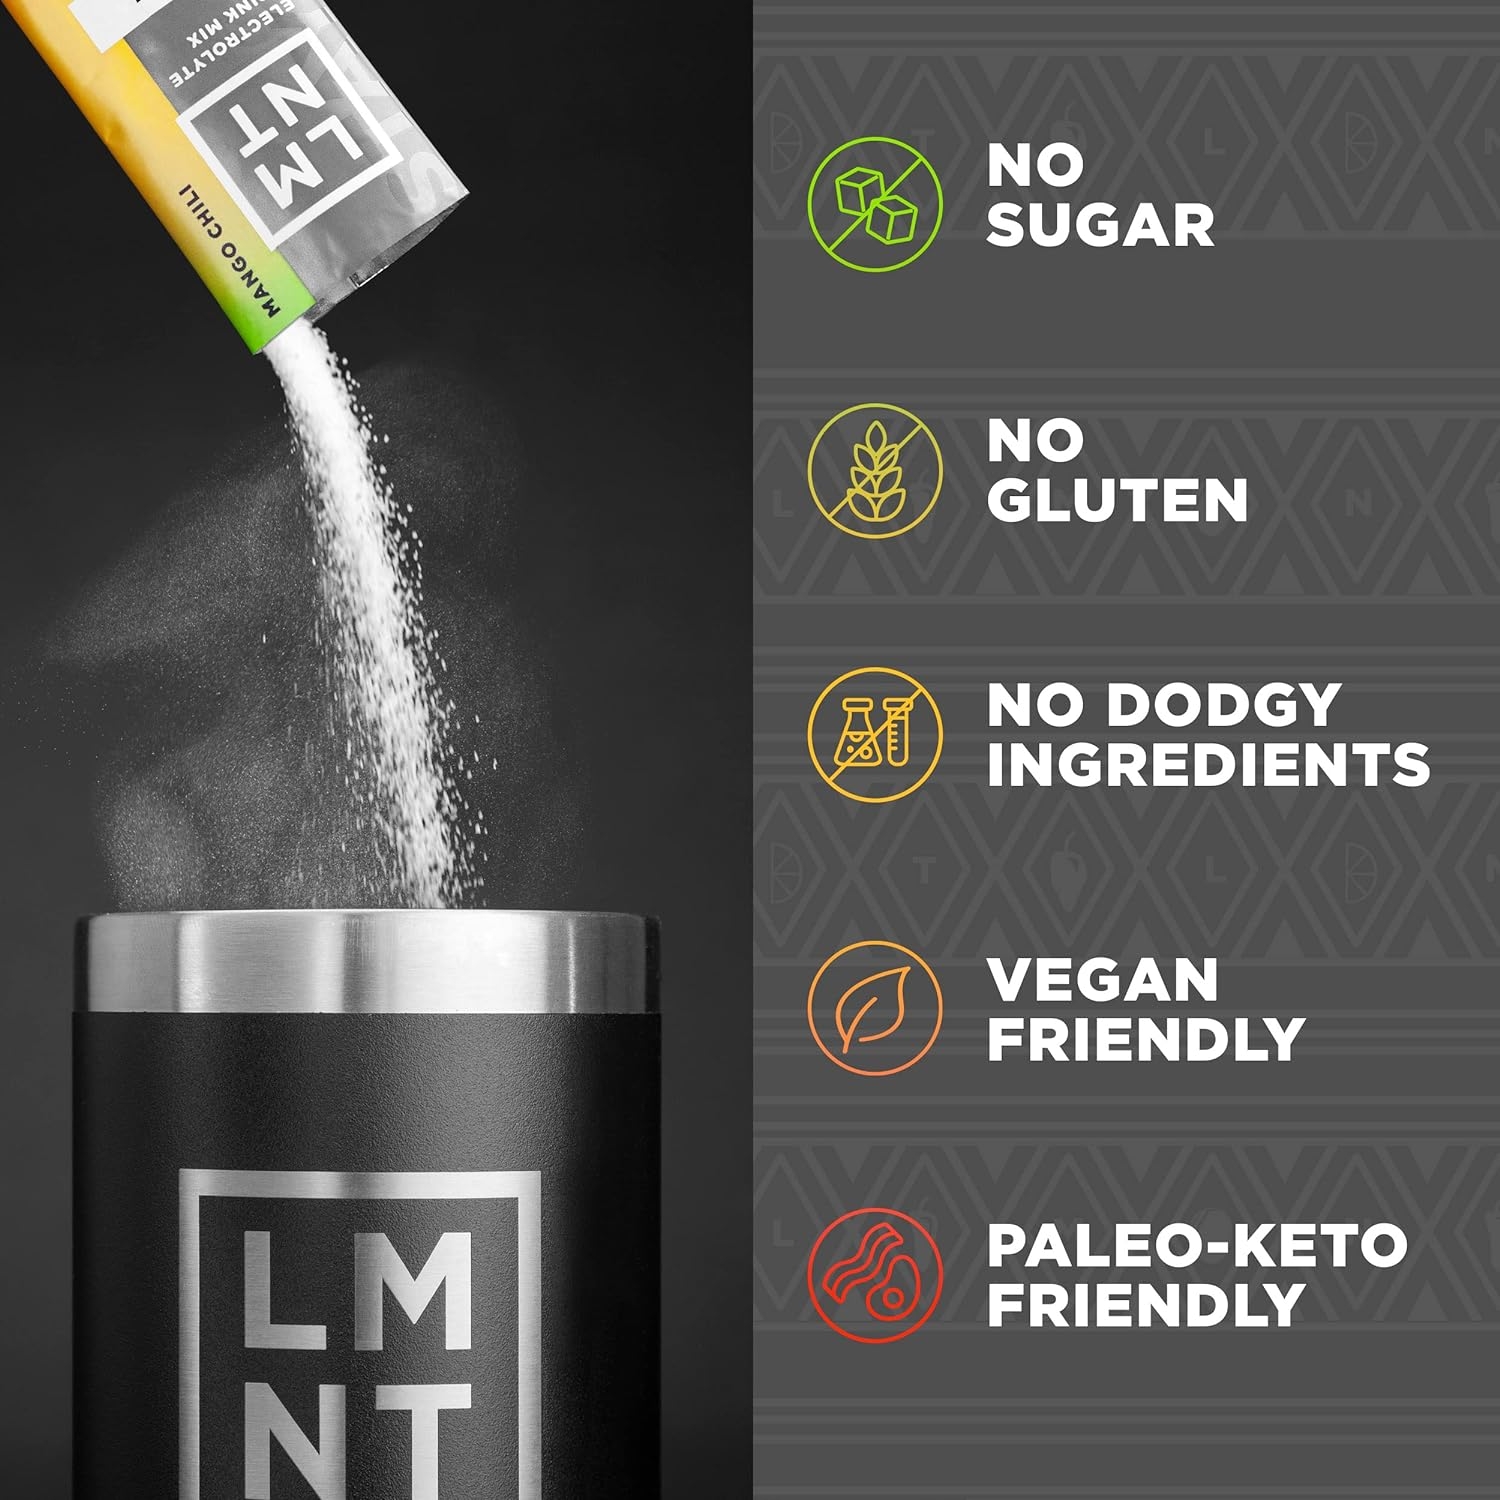 LMNT Keto Electrolyte Powder Packets | Paleo Hydration Drink Mix | No Sugar, No Artificial Ingredients | Fiesta Pack | 12 Stick Packs